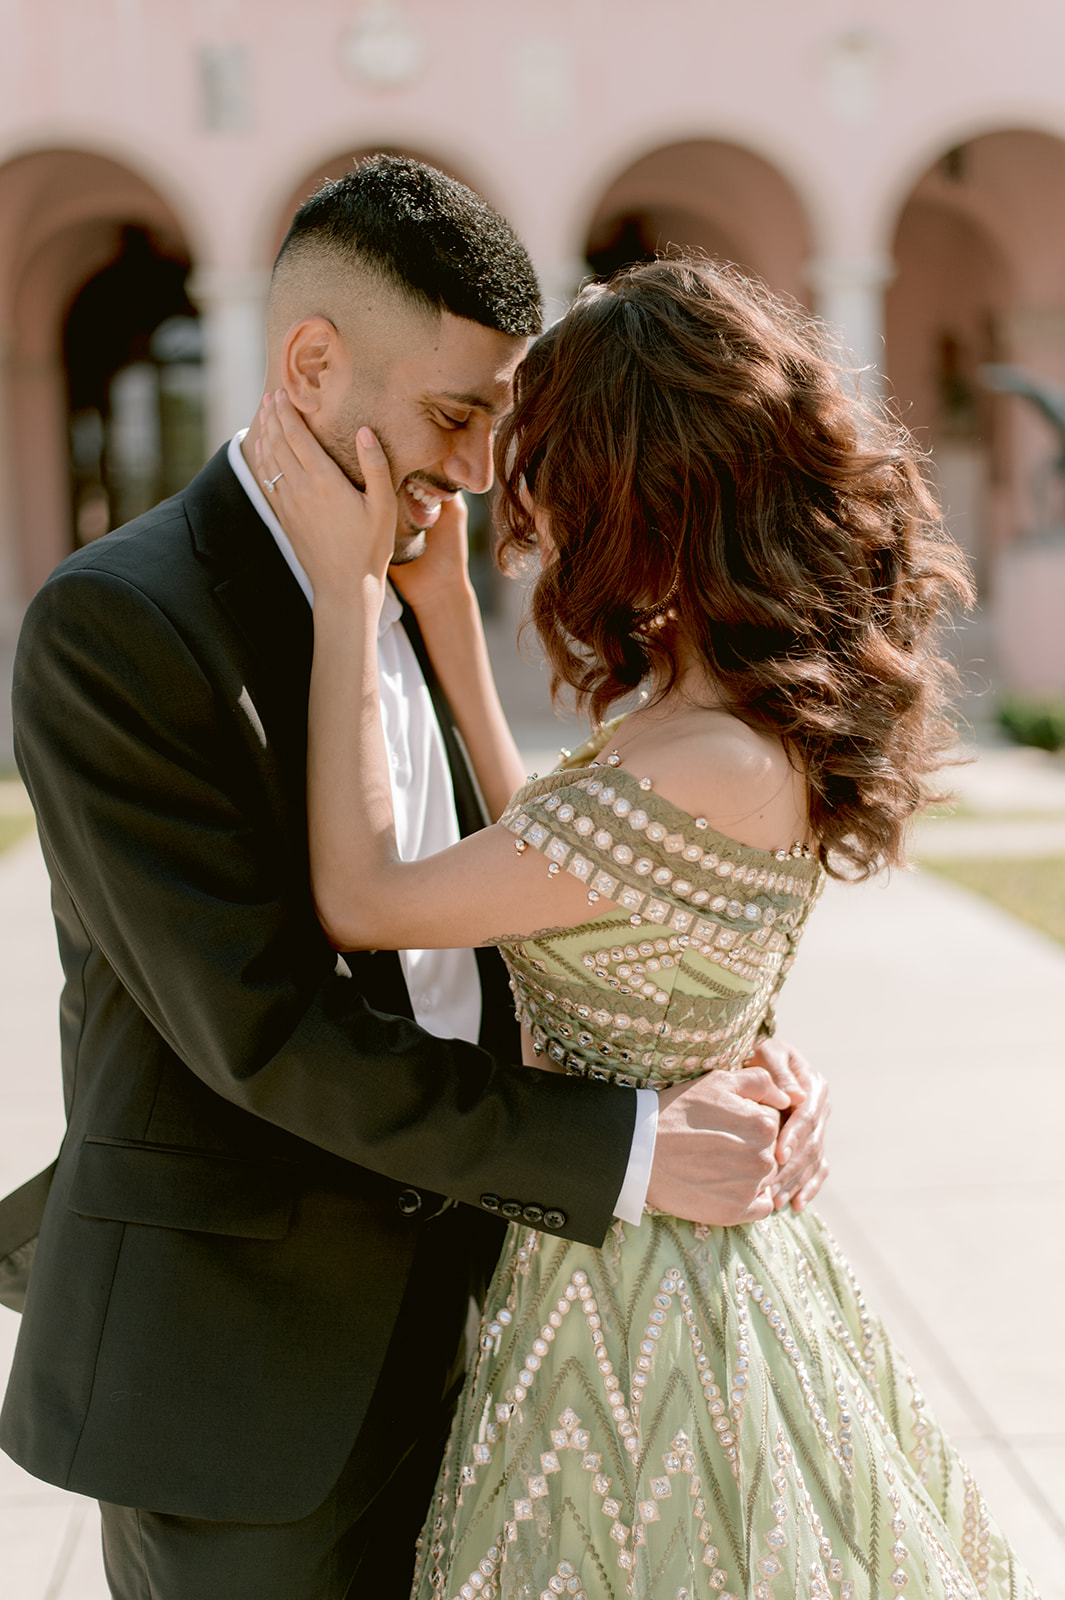 "Beautiful couple captured in front of the Ringling Museum's Ca' d'Zan mansion"
